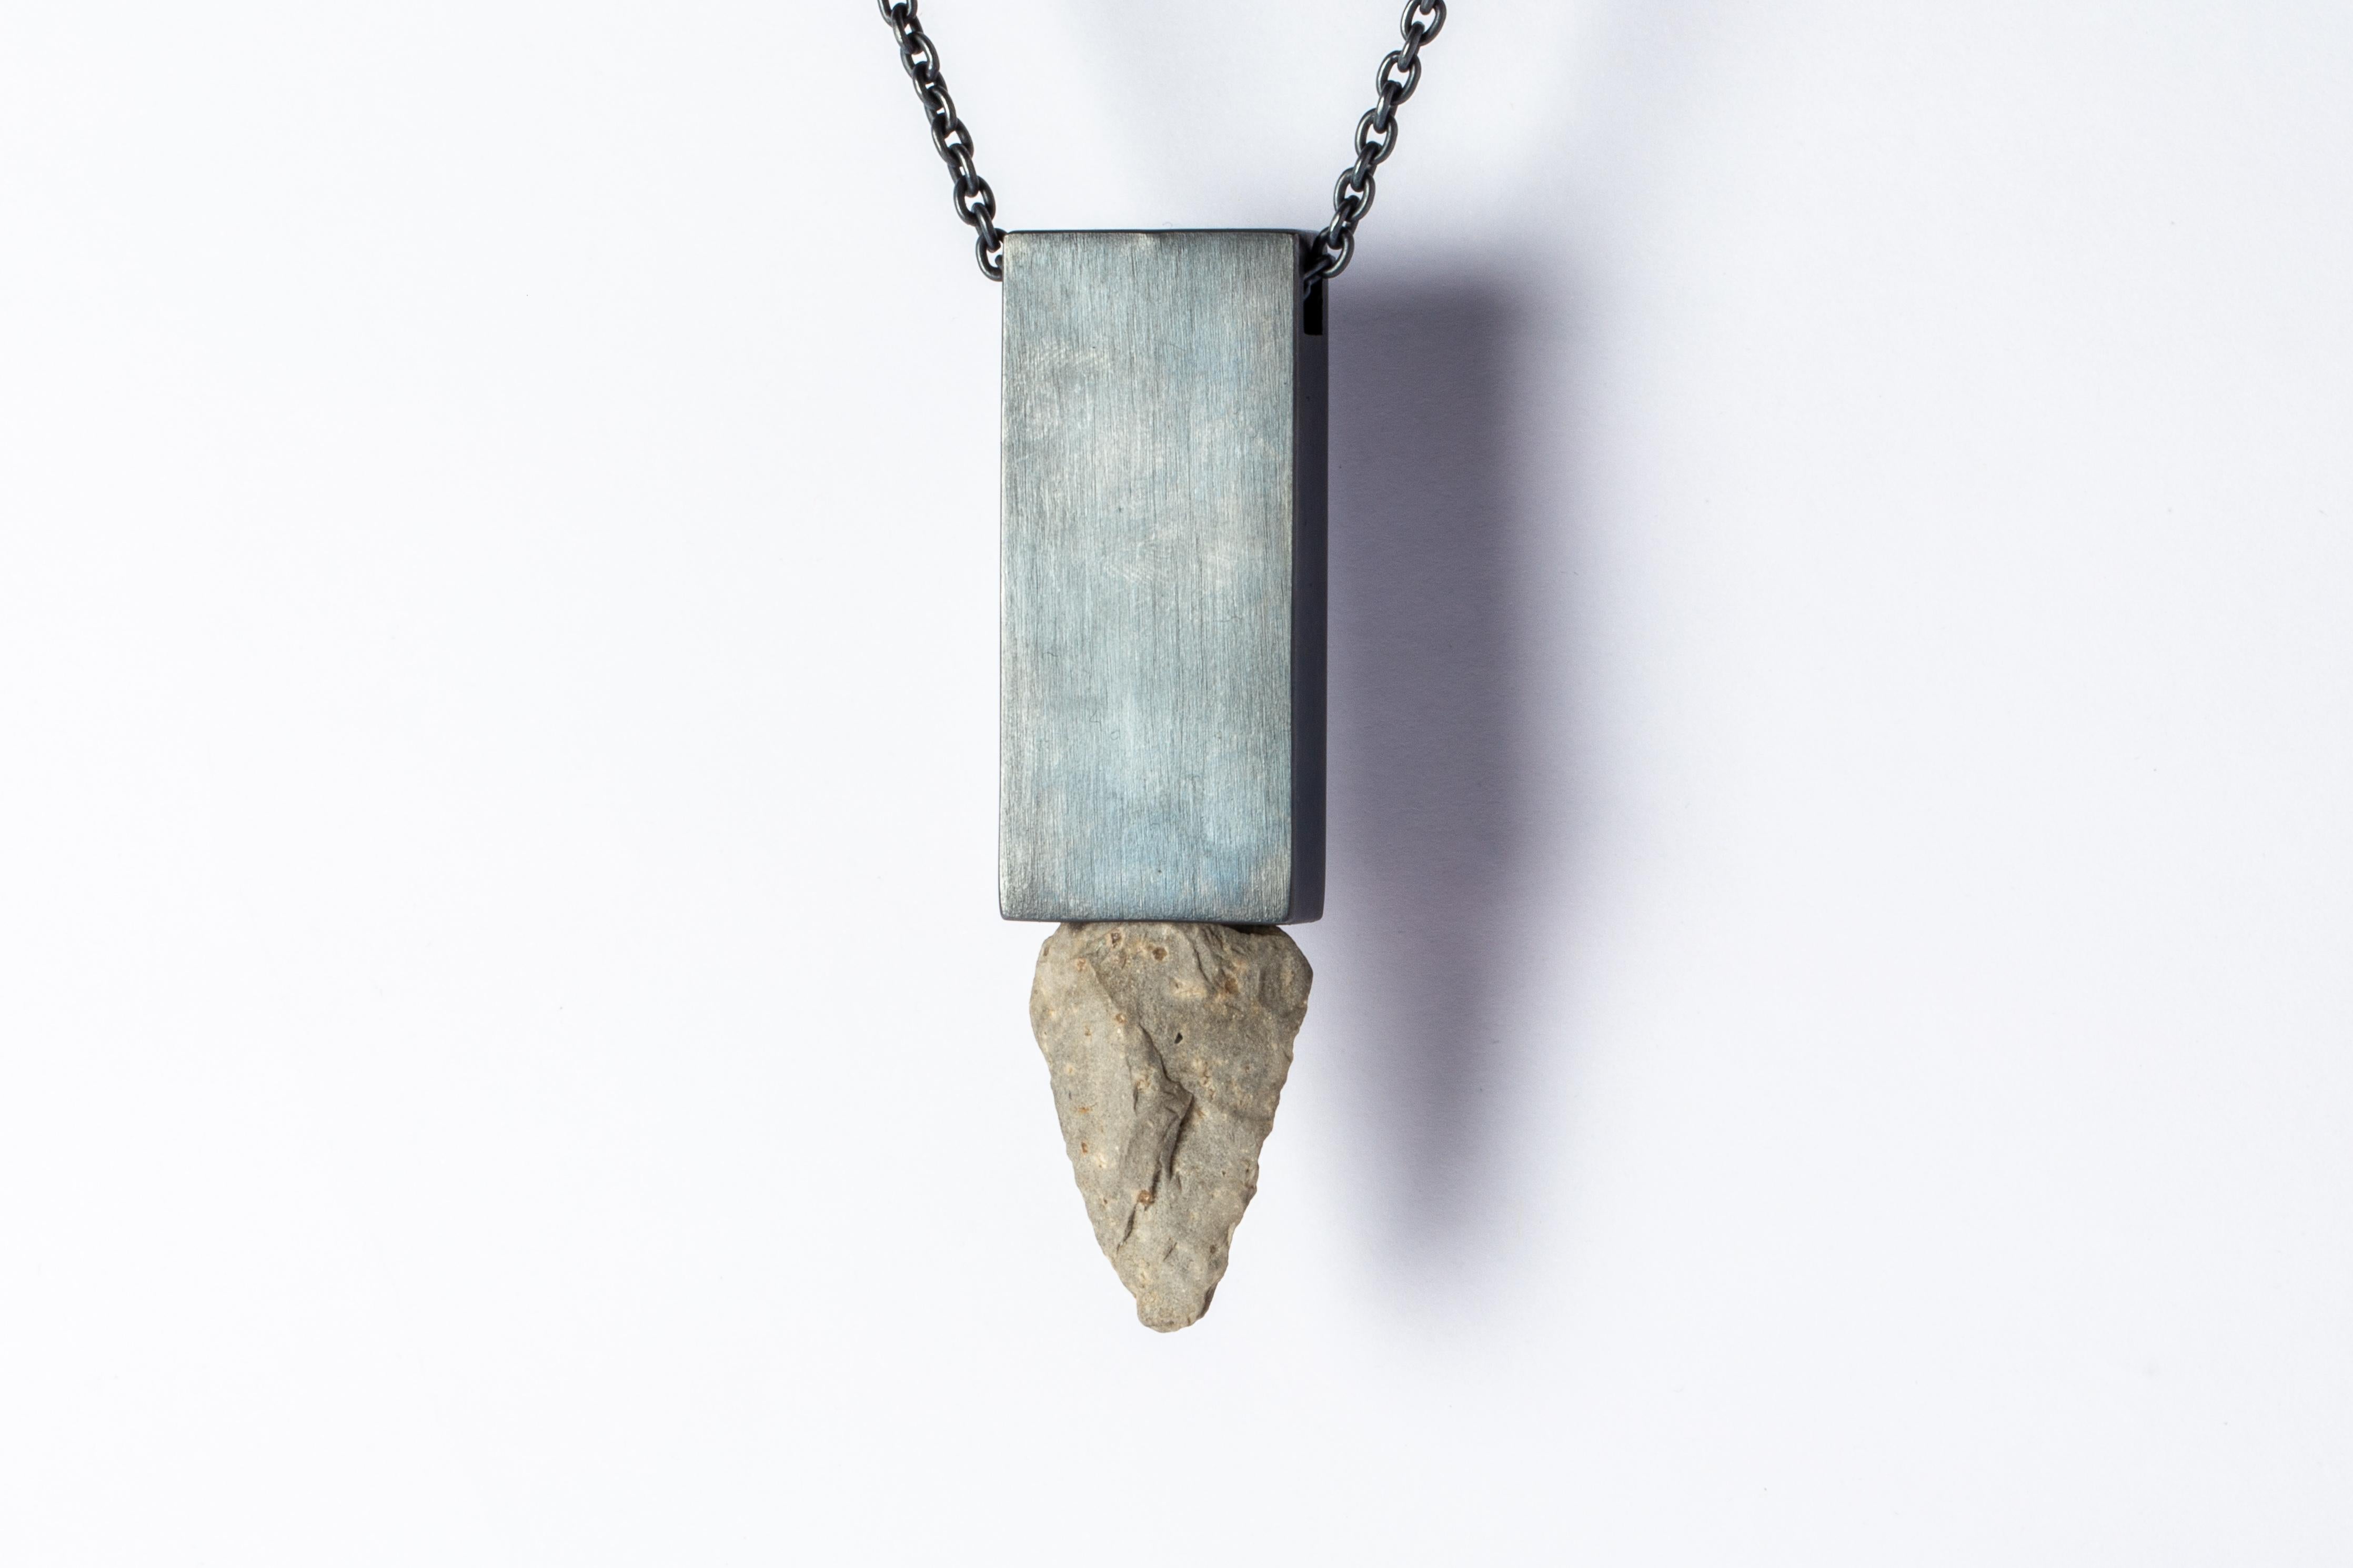 Necklace in the shape of cuboid made in oxidized sterling silver and a rough of arrowhead stone. This piece are built using true arrowhead relics. Their wild history creates a depth and magic that is uniquely human. There are currently two design